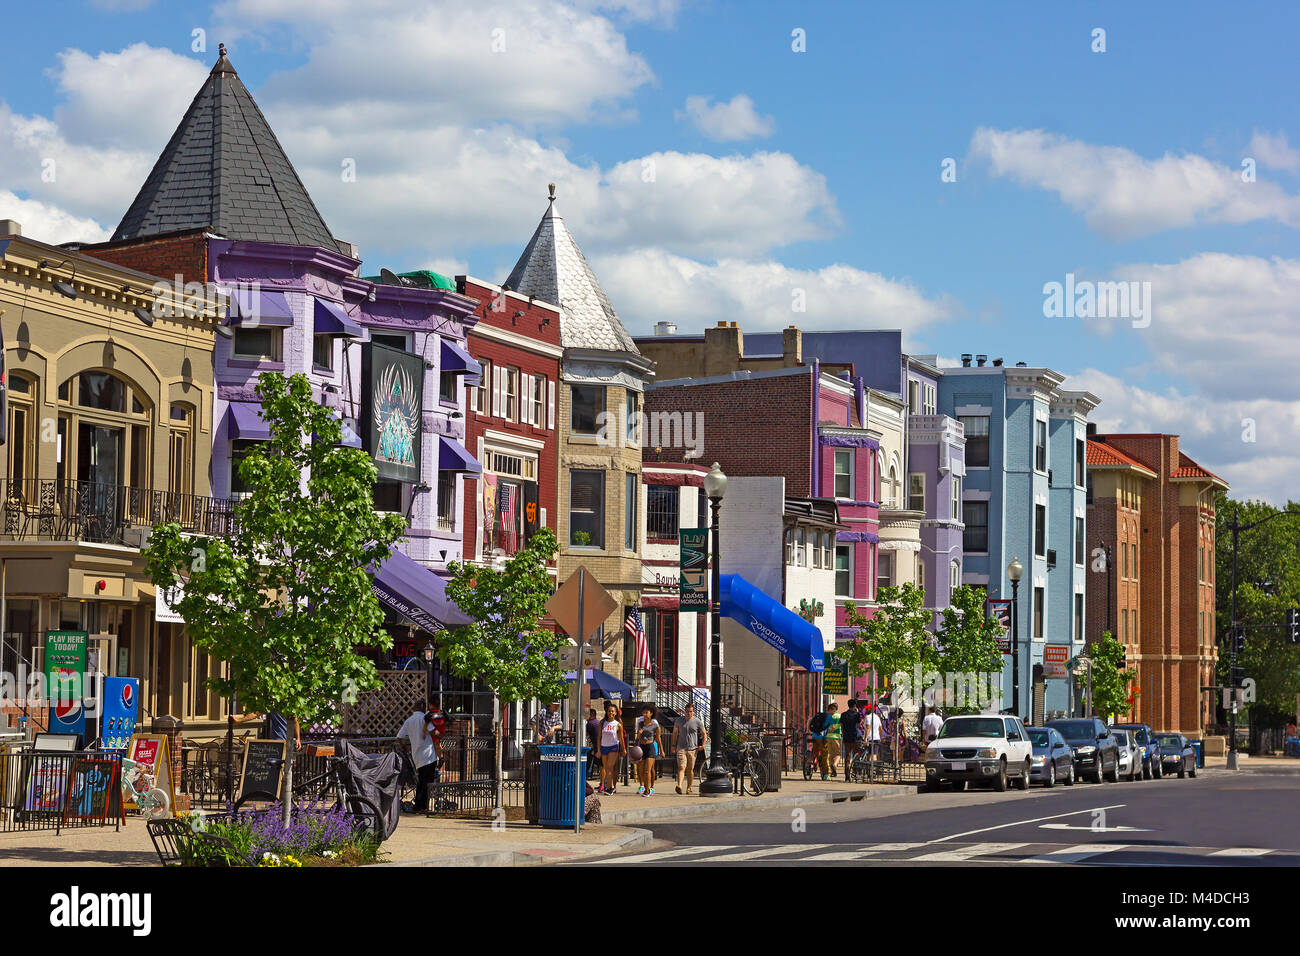 WASHINGTON DC, USA – MAY 9, 2015: Row houses and businesses in Adams Morgan neighborhood on a perfect spring day with young people walking on the stre Stock Photo